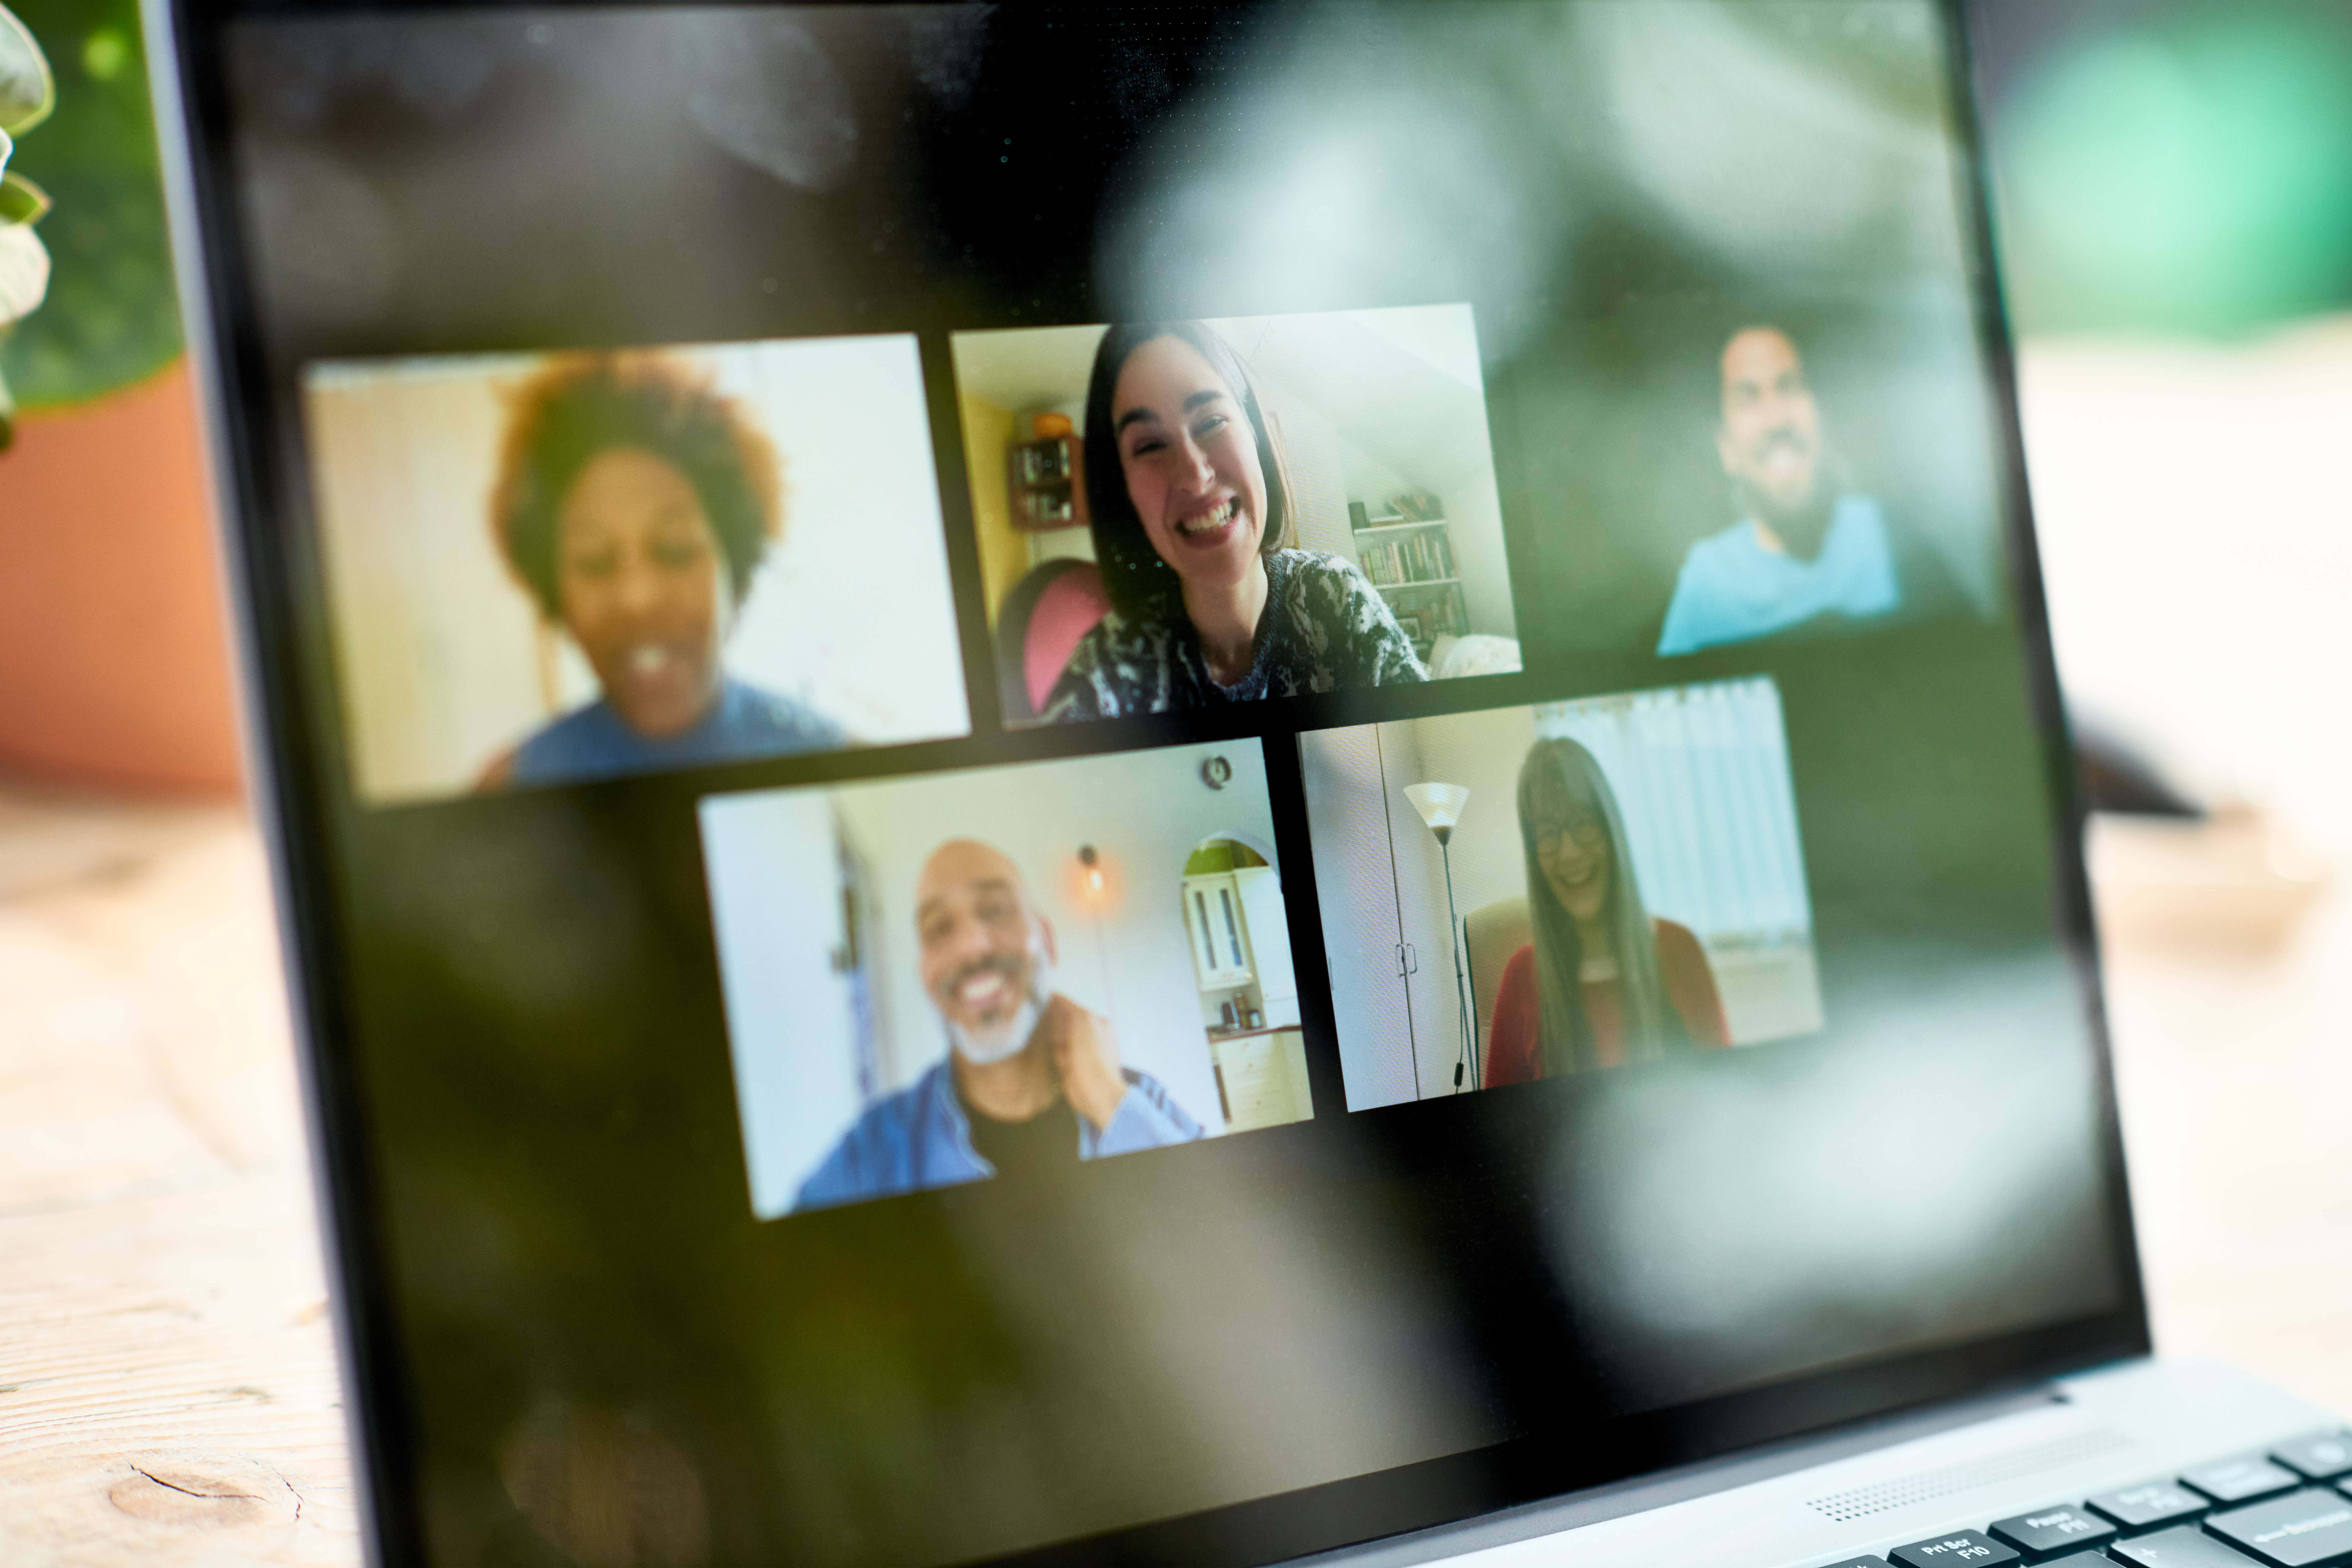 Smiling faces on laptop screen during video call